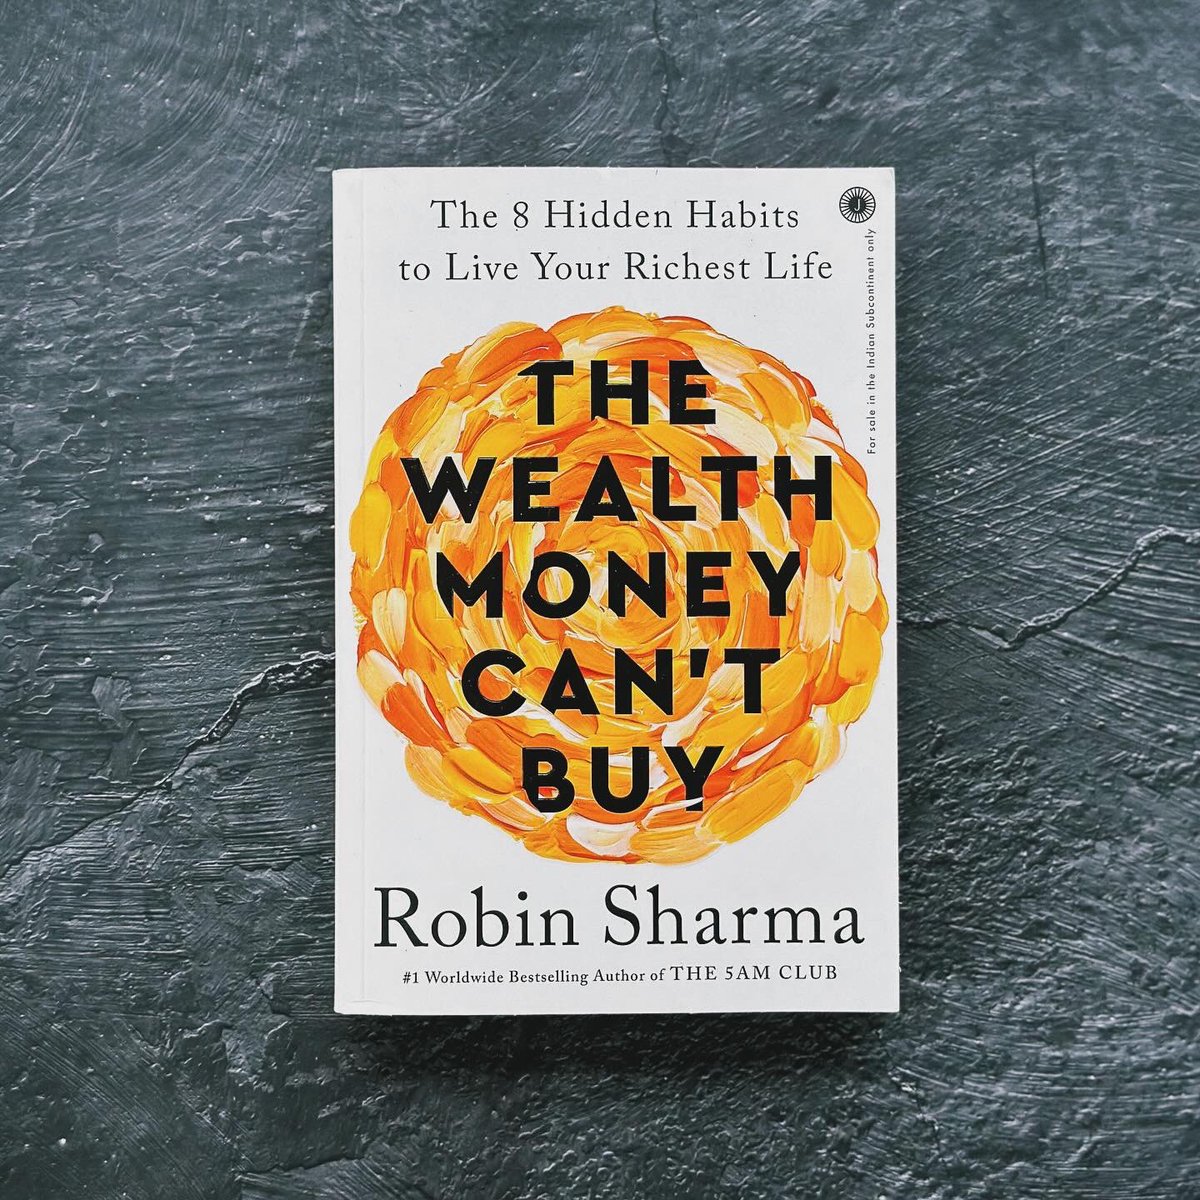 ‘Some people are so poor, all they have is money.’ - Bob Marley

Discover the hidden habits to live your richest life and avoid the lasting regrets of potential unfulfilled.

#thewealthmoneycantbuy #robinsharma